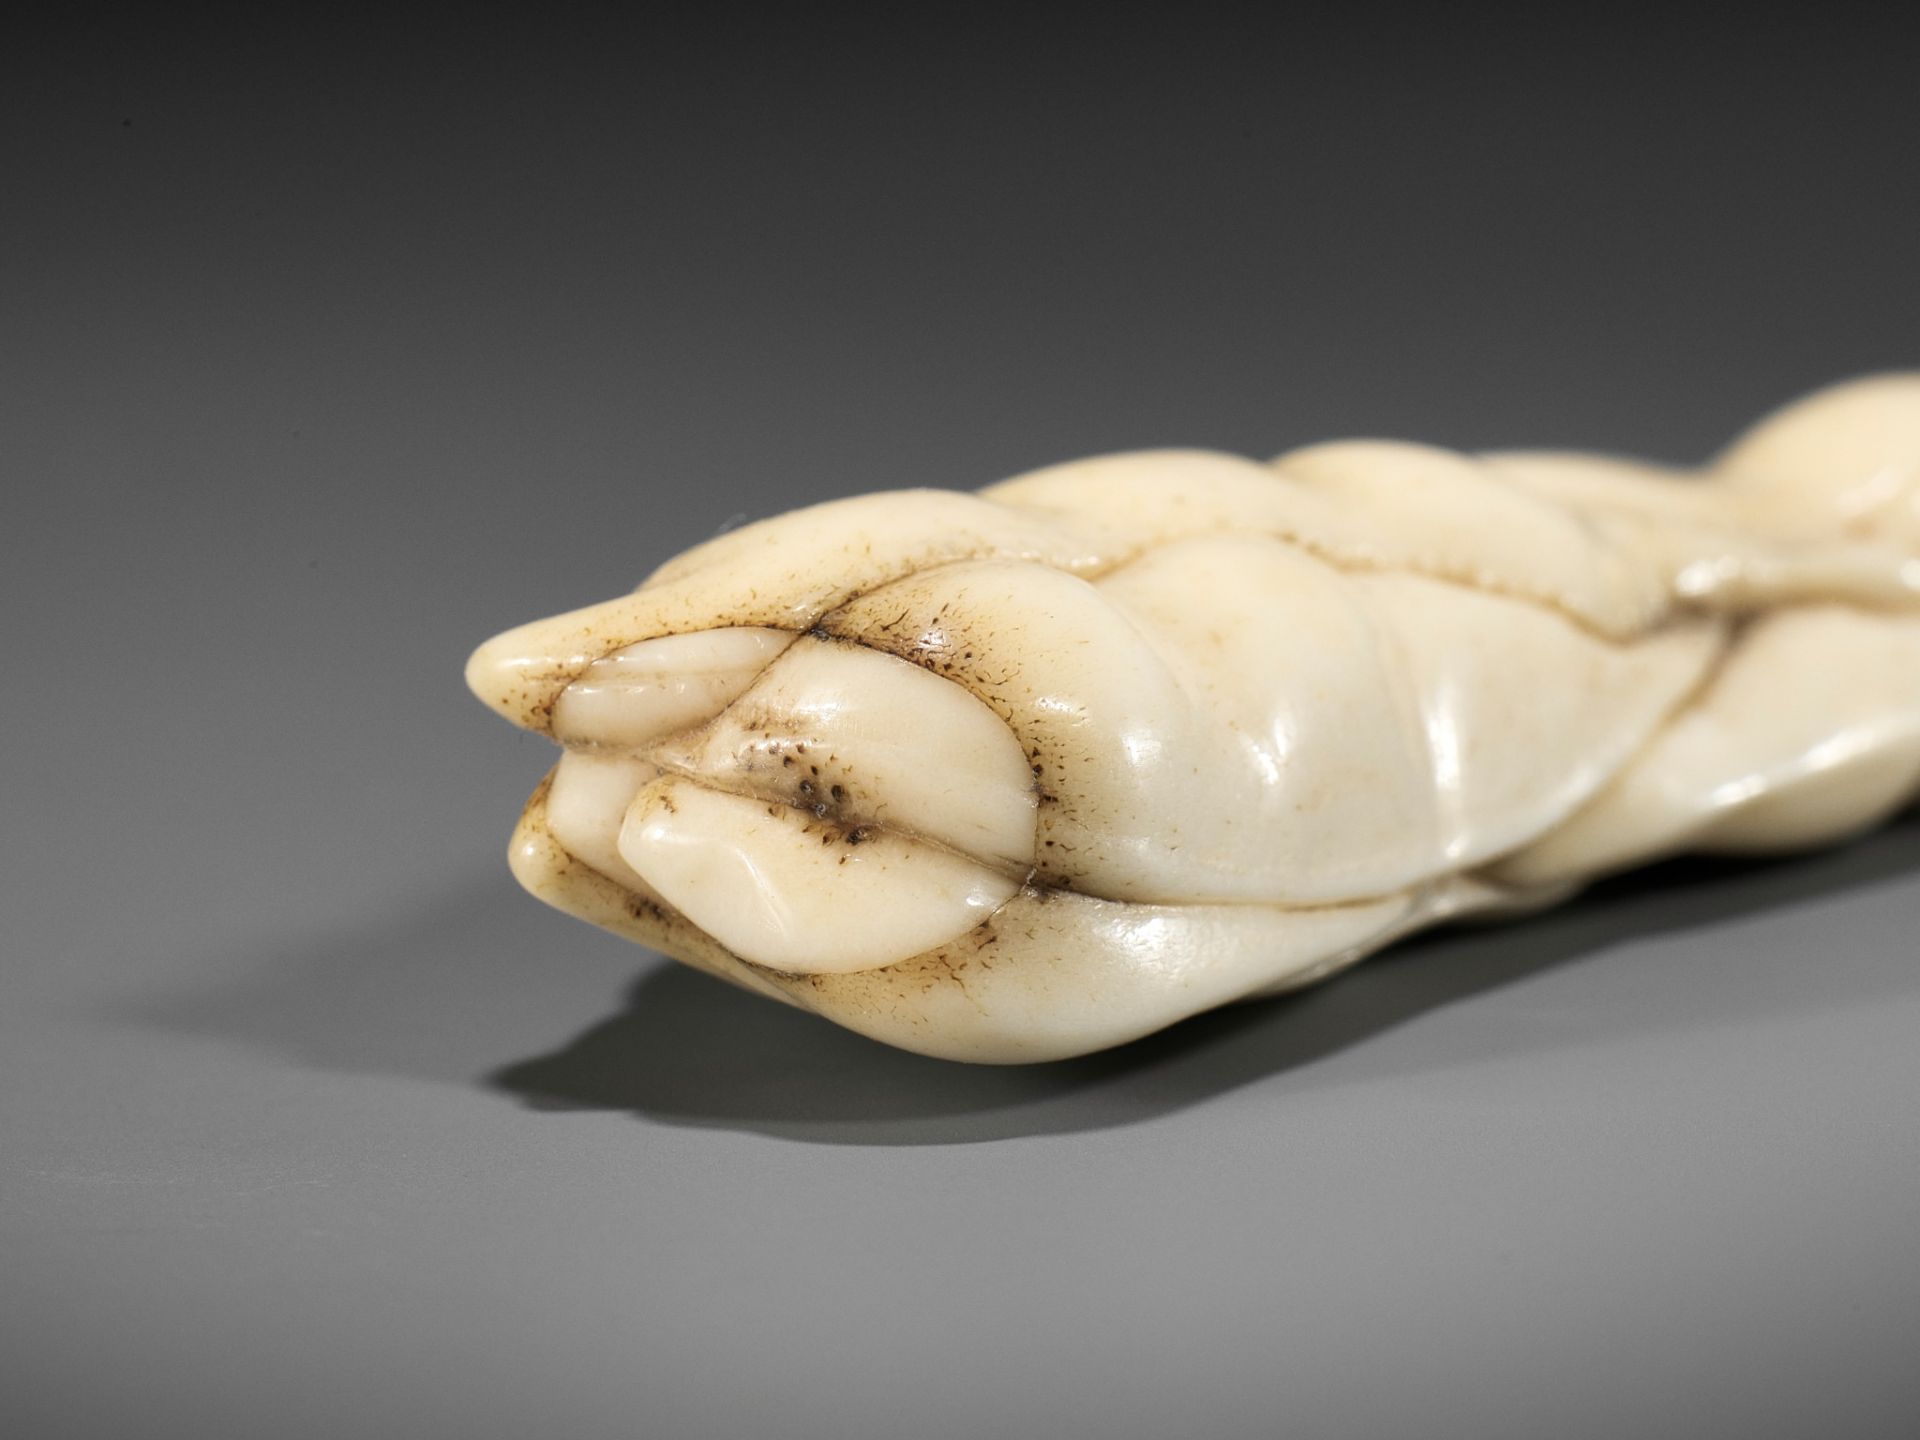 A SUPERB STAG ANTLER NETSUKE OF EDAMAME BEAN-PODS - Image 3 of 9